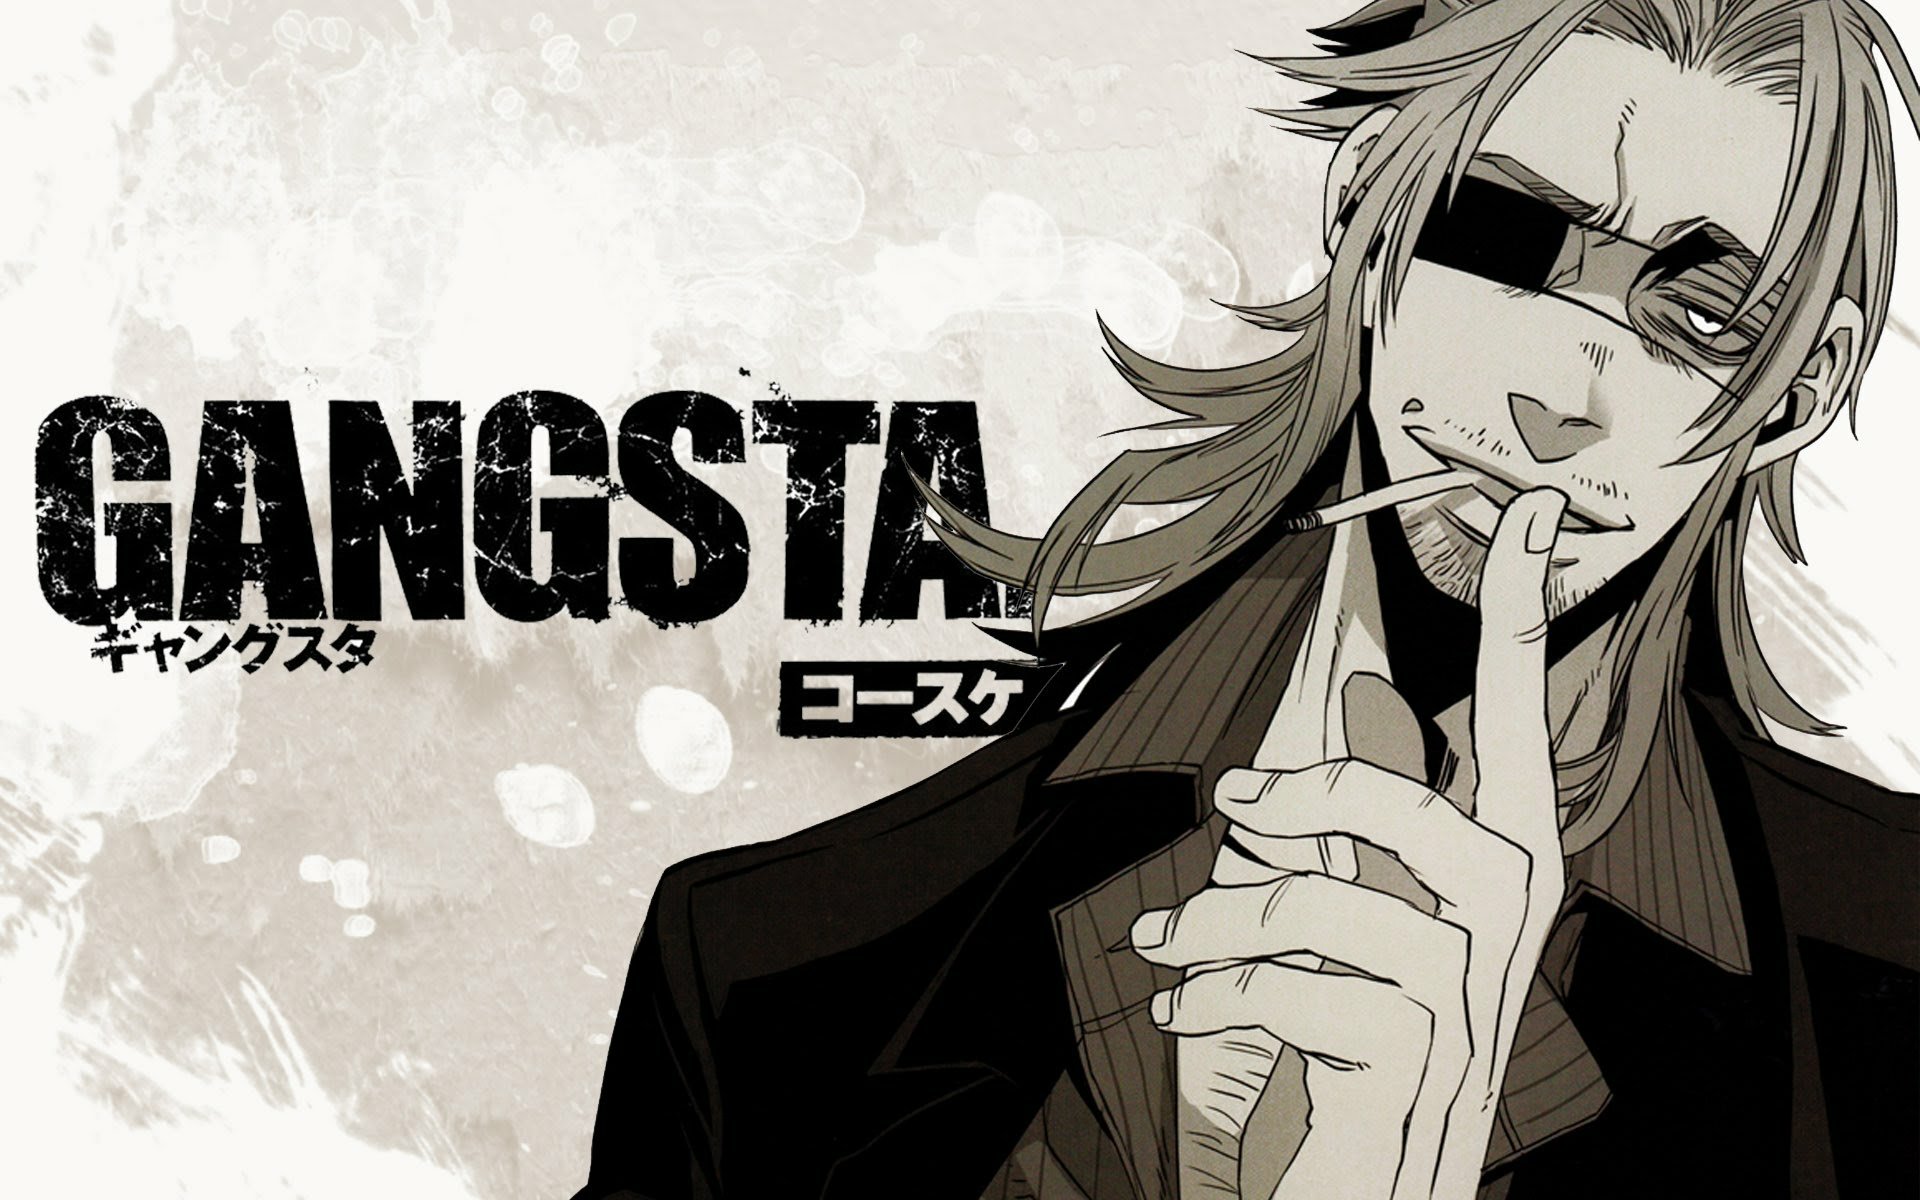 Anime Gangster Wallpapers - Wallpaper Cave